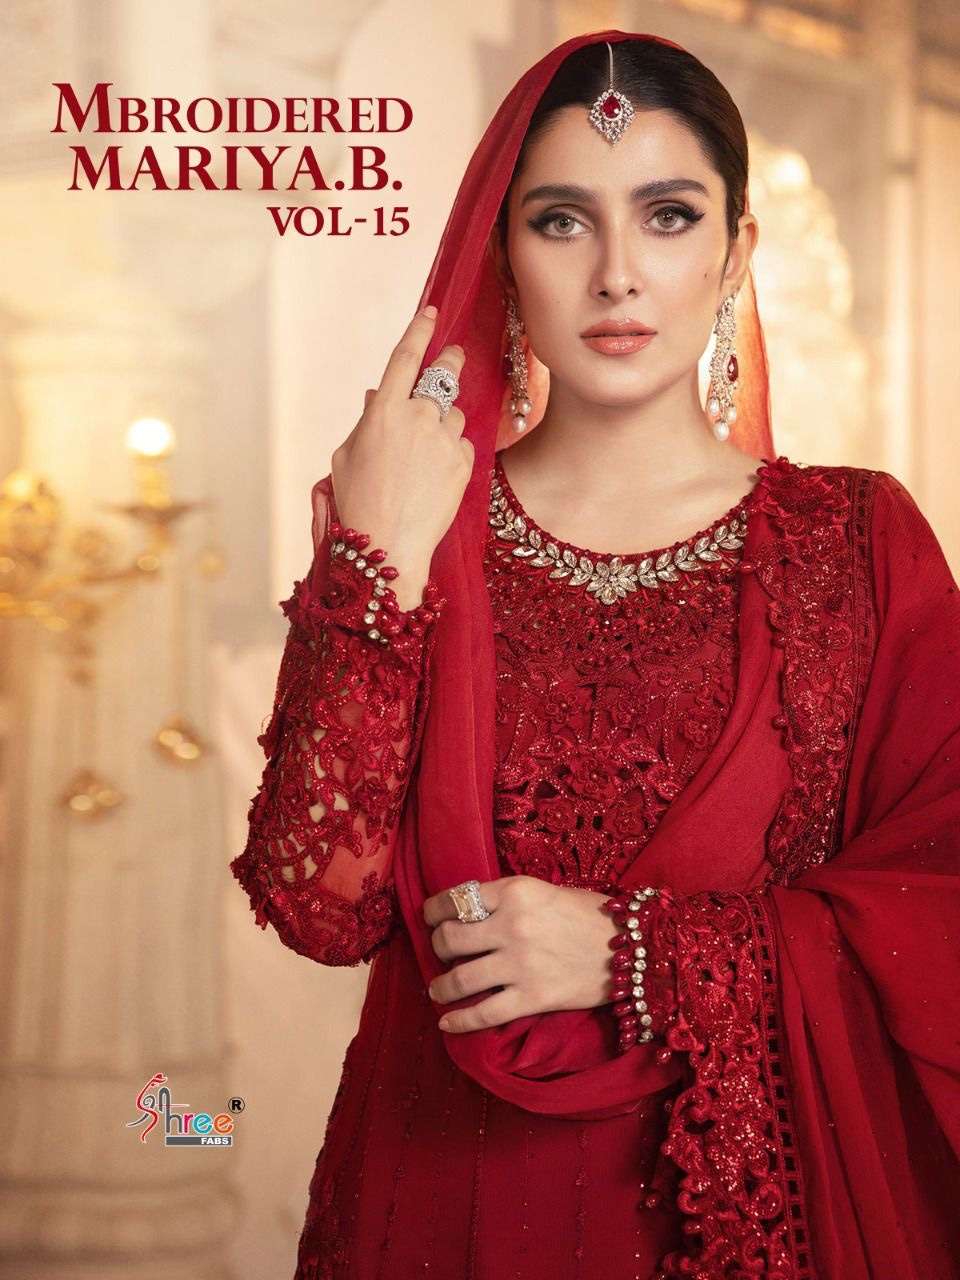 Shree fabs maria b mbroidered vol 15 organza faux georgette ...